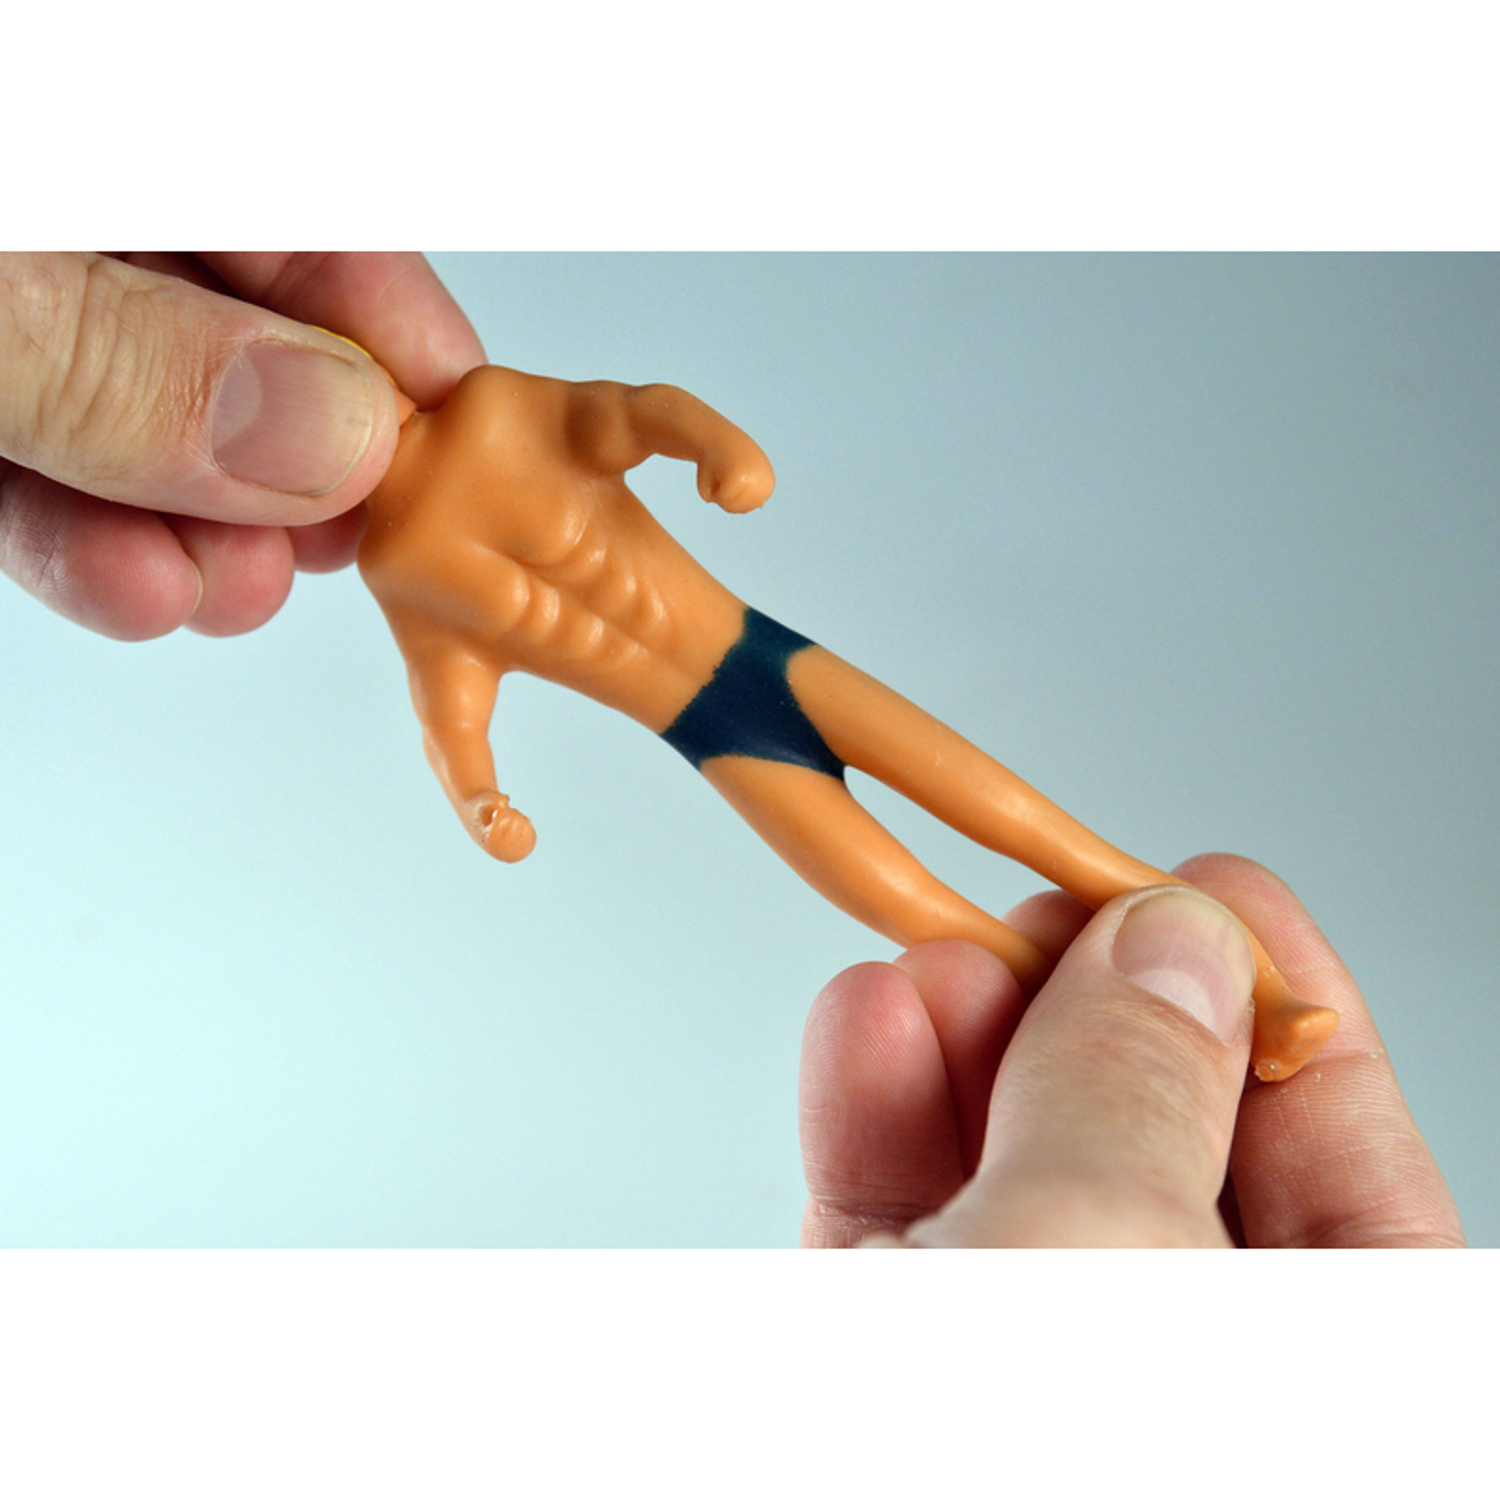 Photos - Other interior and decor Impulse Super  Worlds Smallest Stretch Armstrong Rubber Multicolored 512 